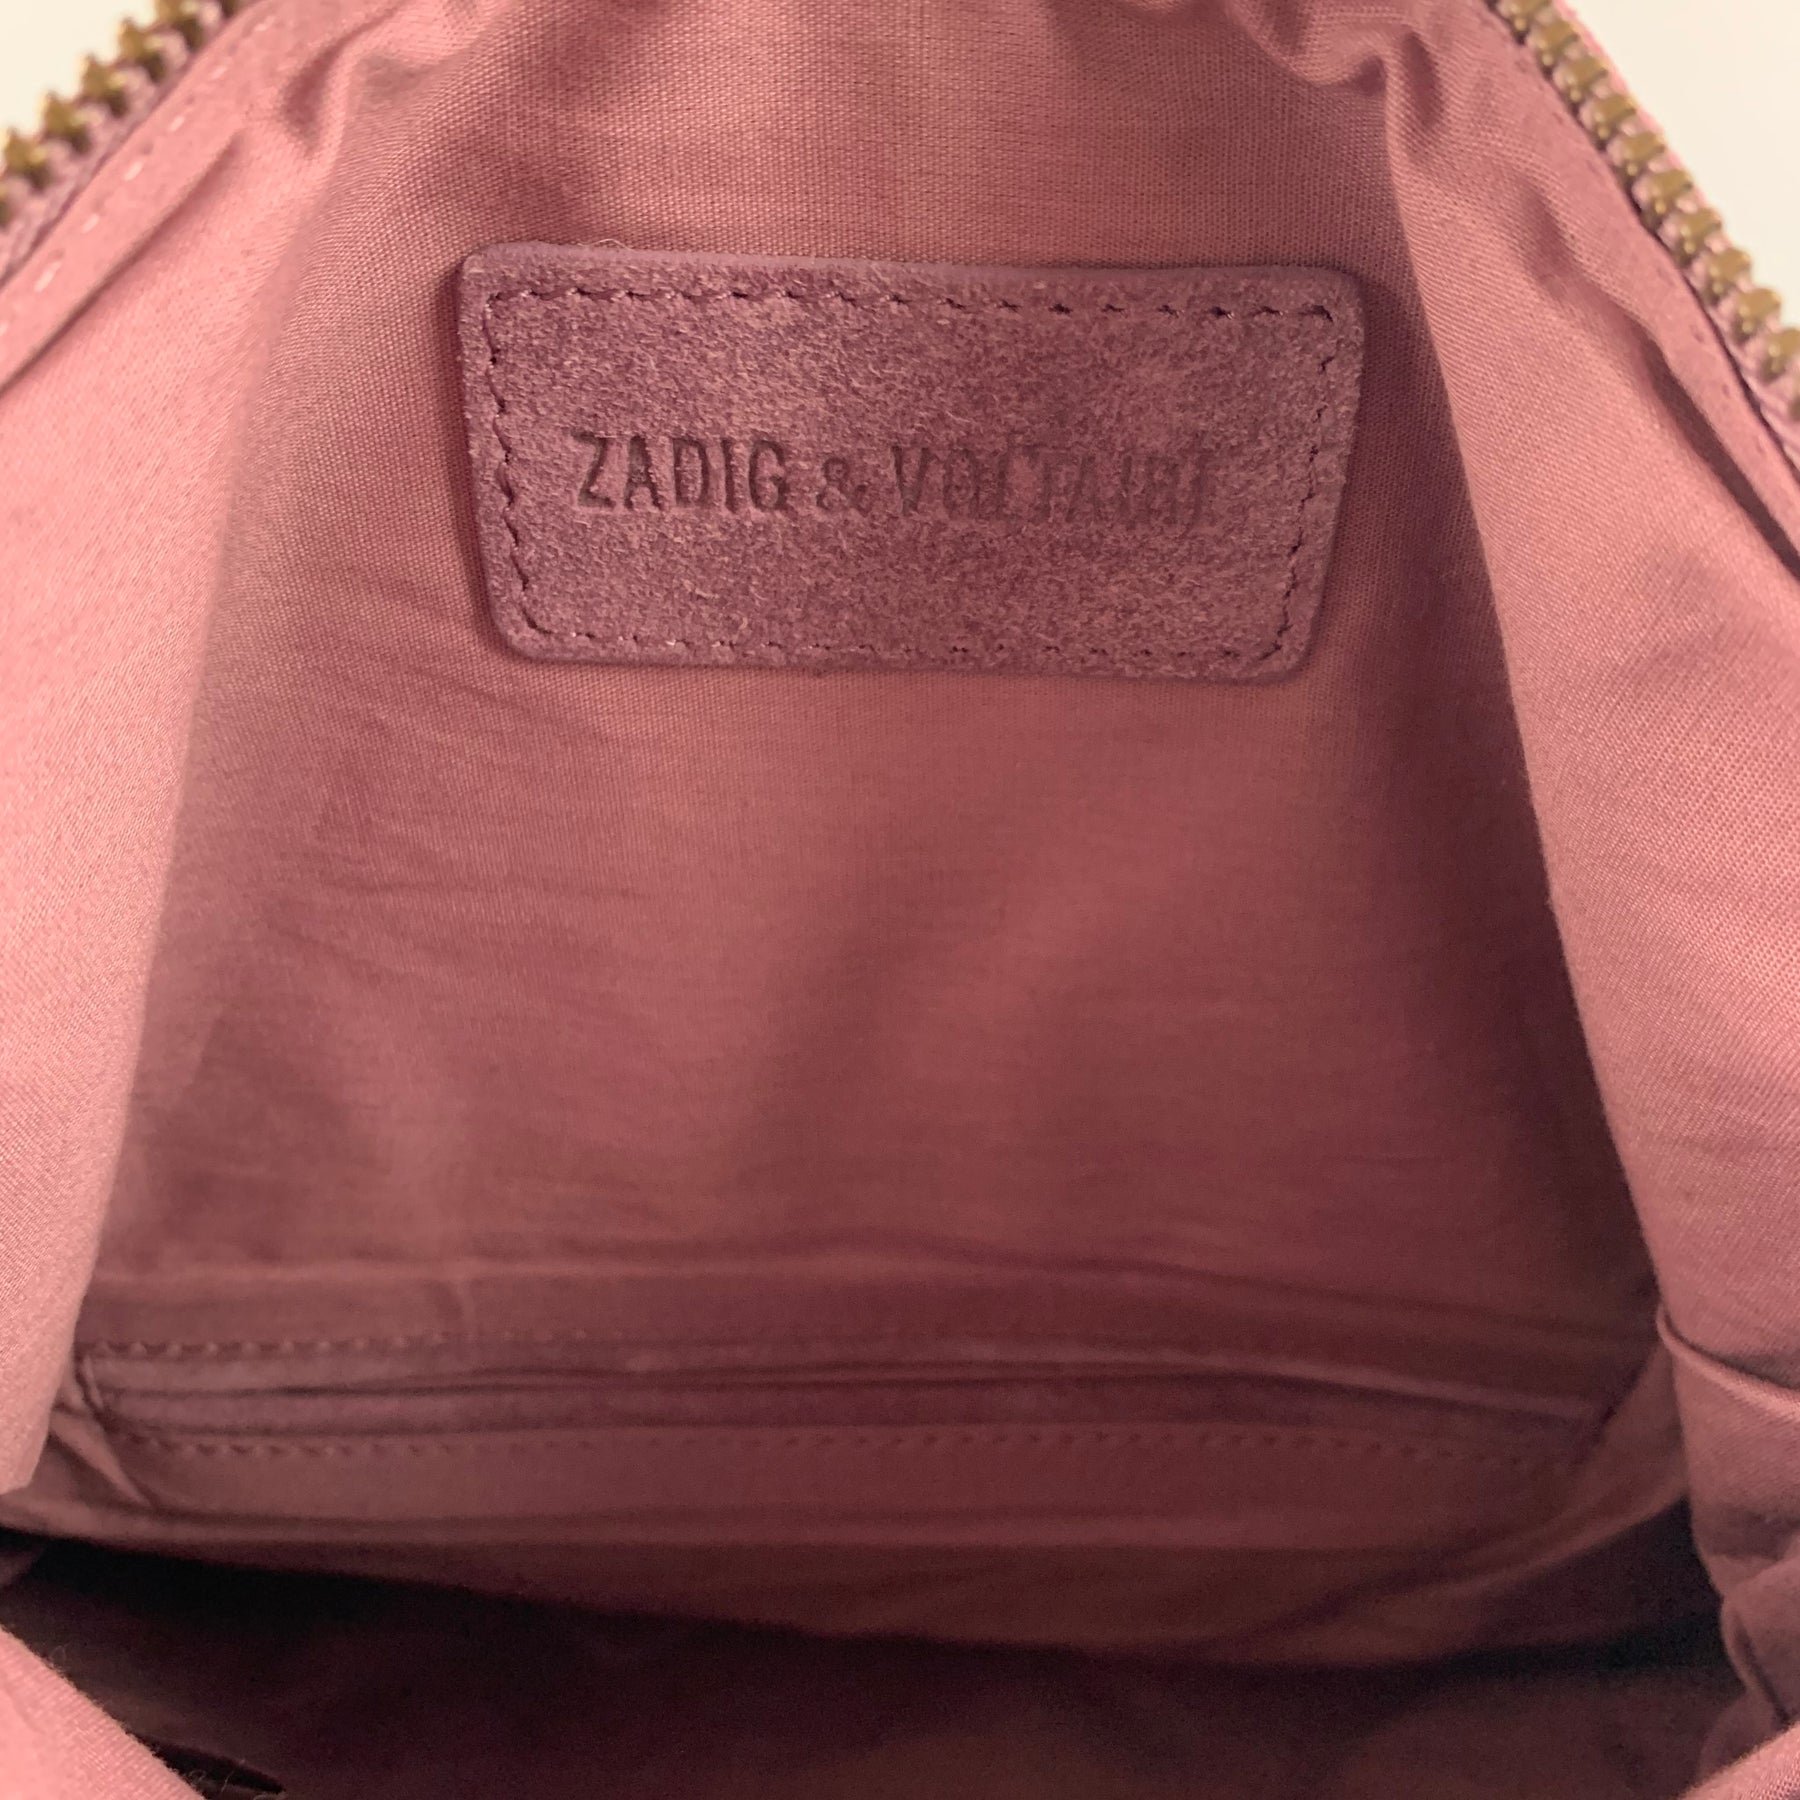 Zadig & Voltaire - Authenticated Handbag - Leather Brown Plain for Women, Very Good Condition